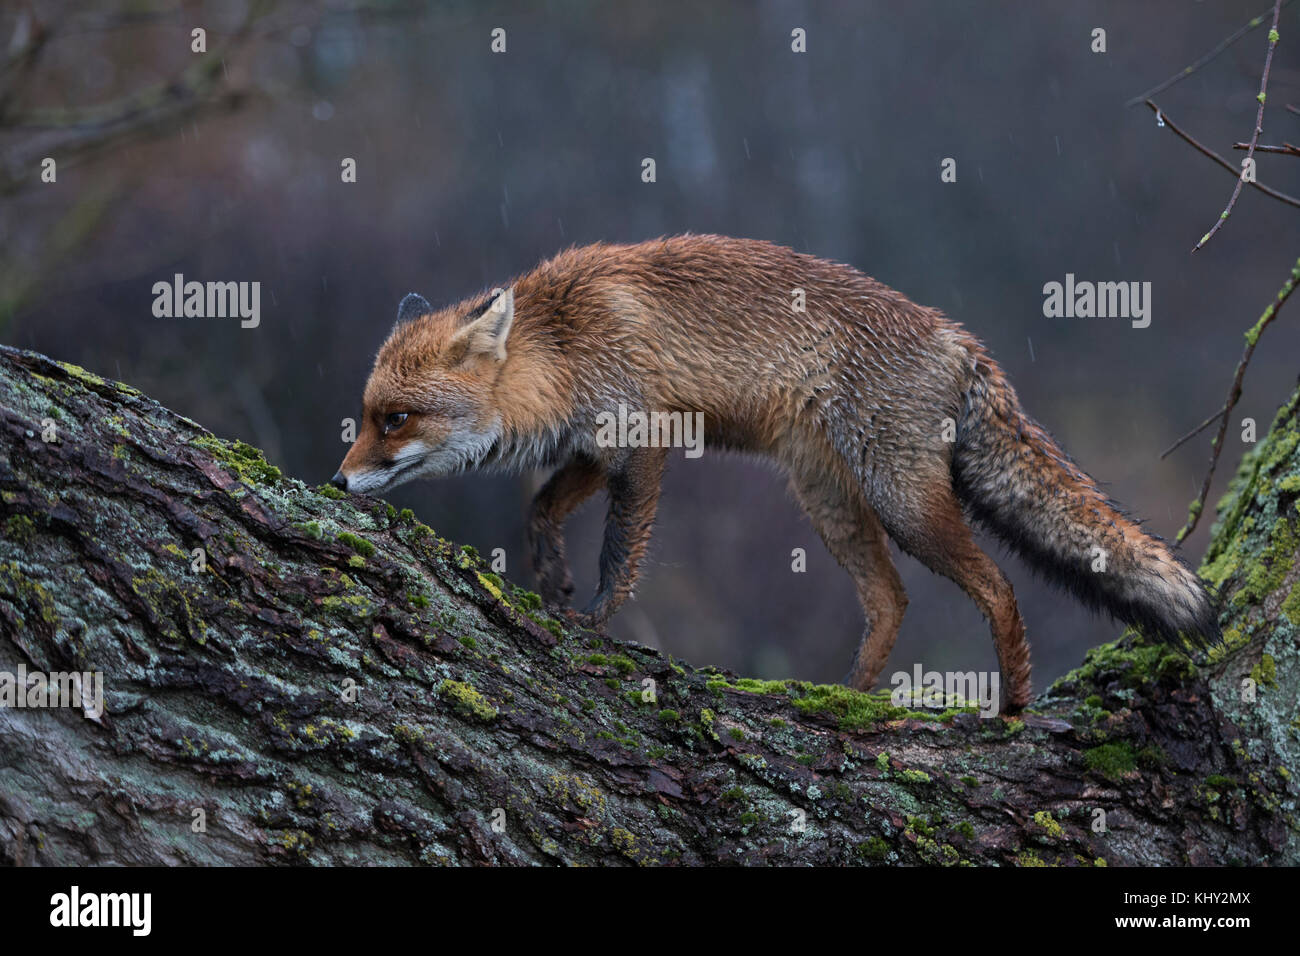 Red Fox / Rotfuchs ( Vulpes vulpes ) adult with wet fur, climbing on a tree, hunting, perfect sense of smell, olfaction, rainy day, wildlife, Europe. Stock Photo